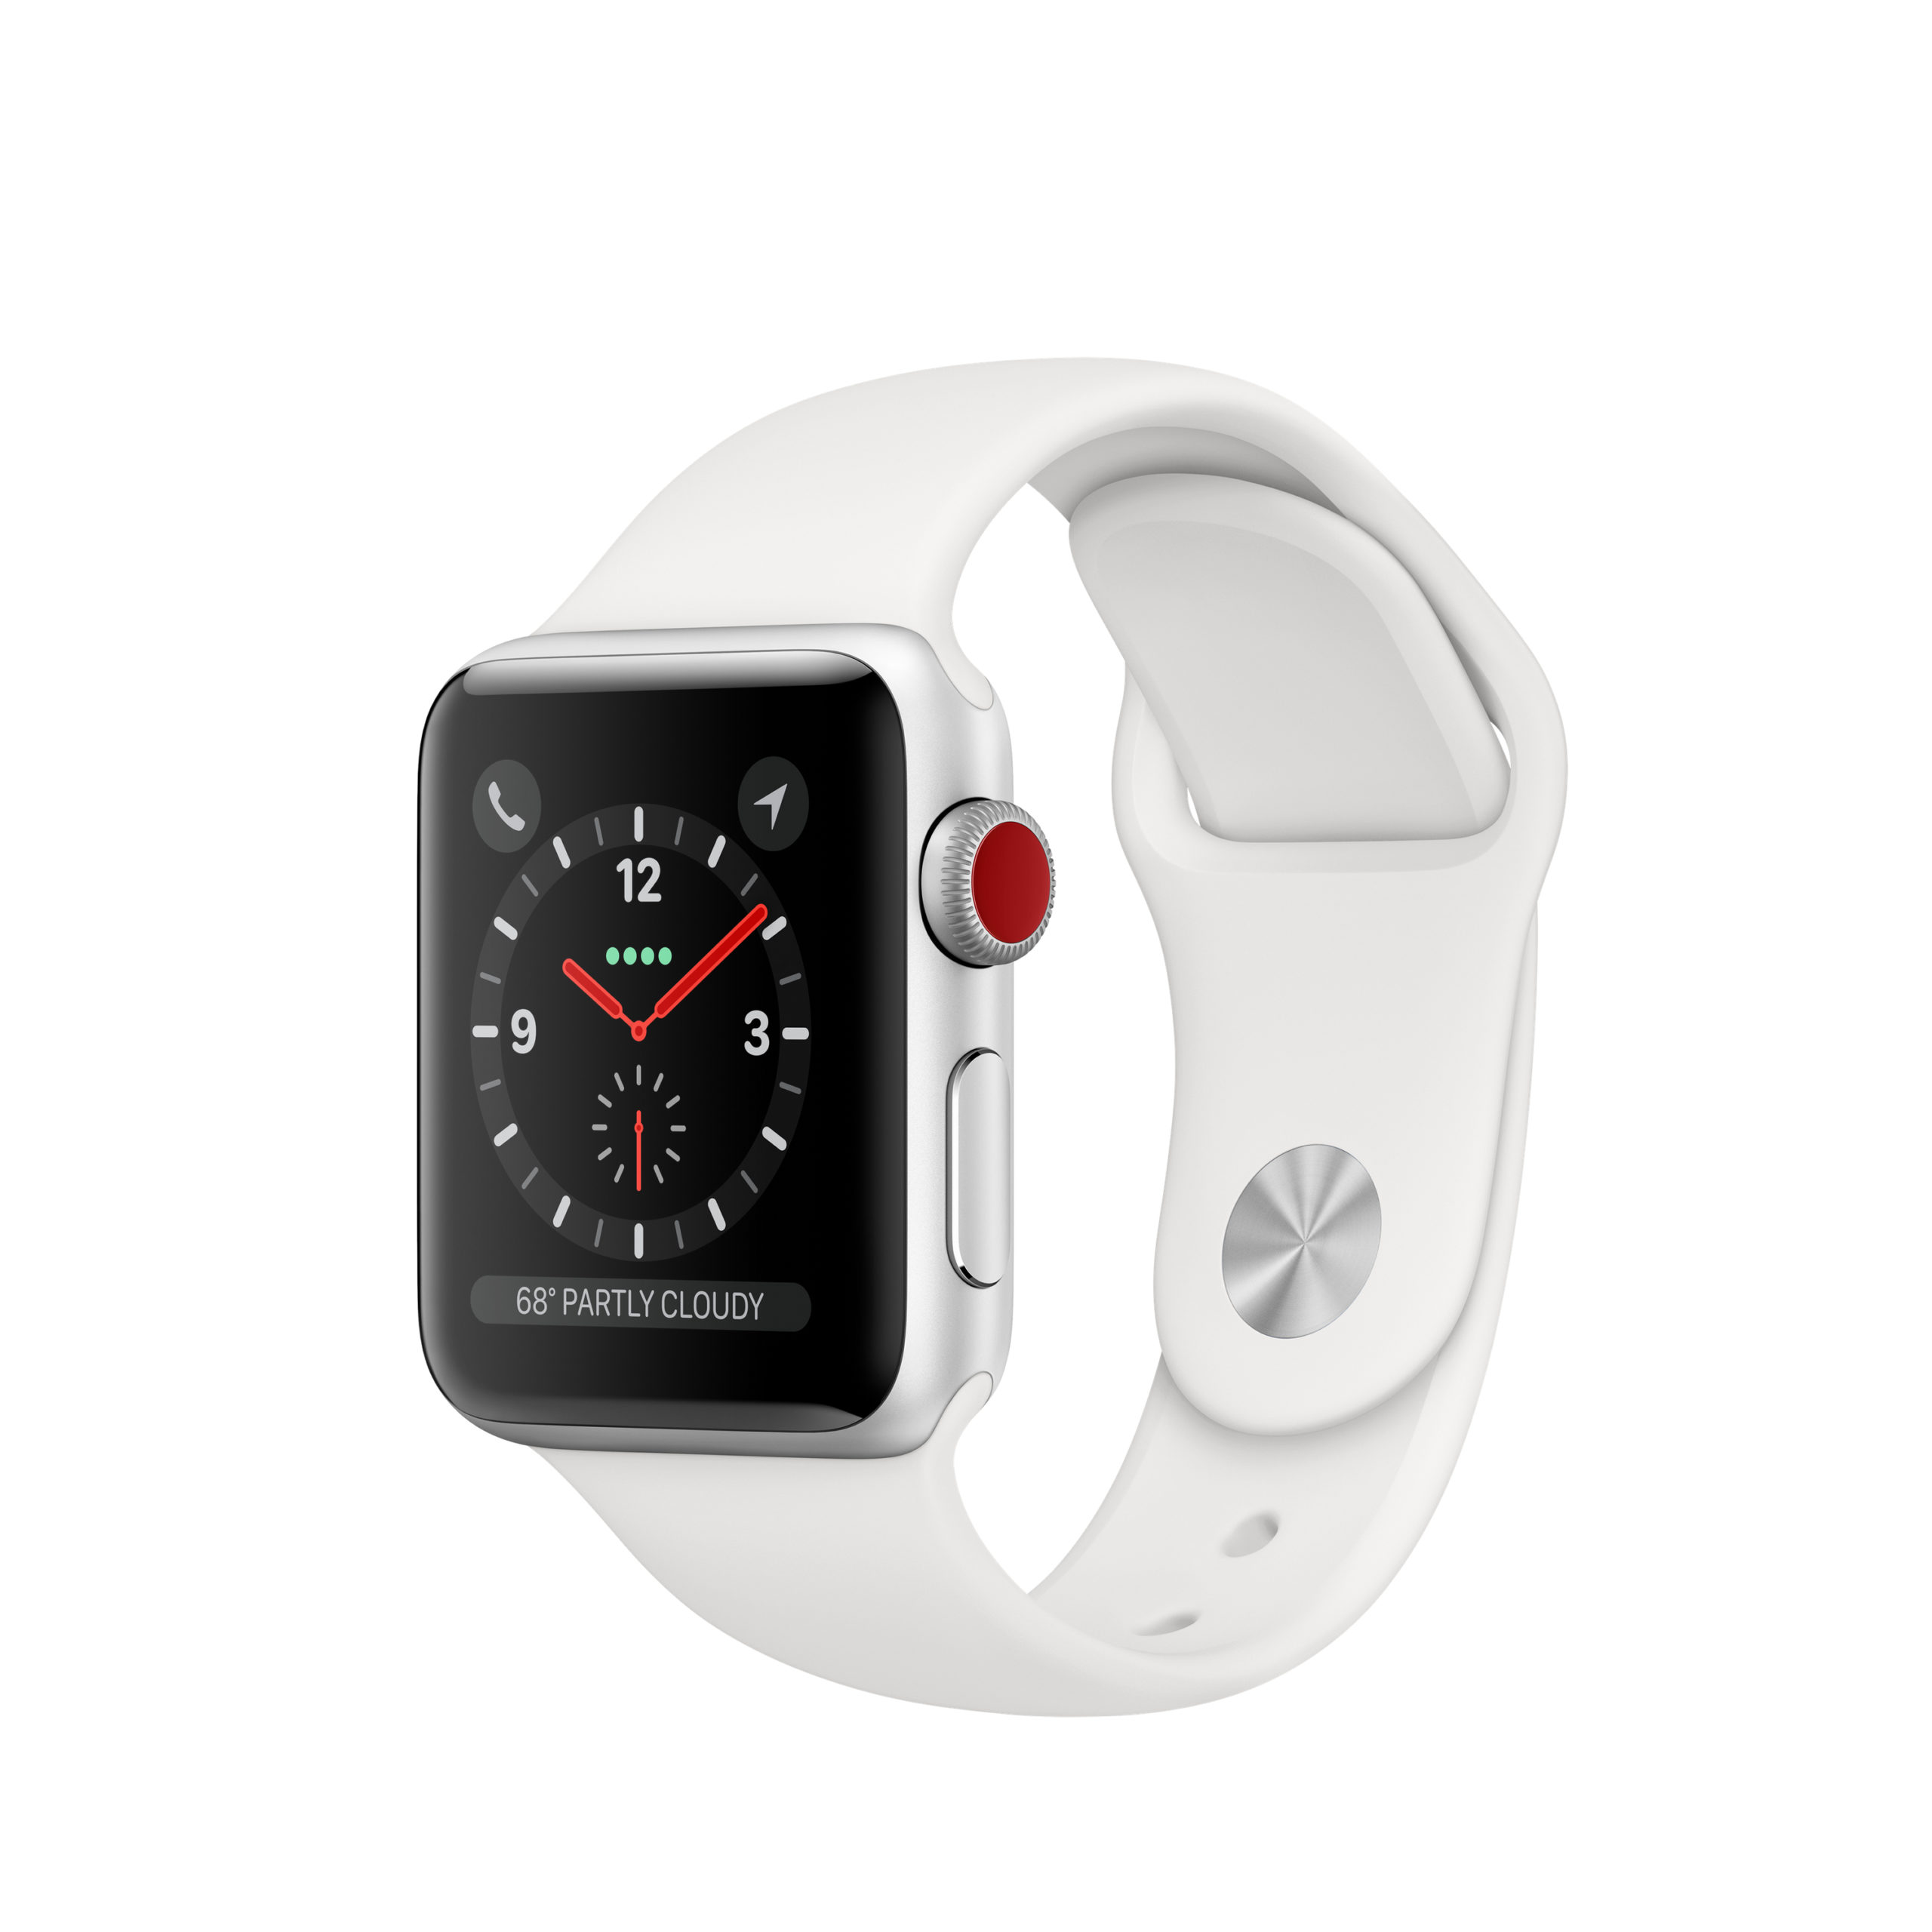 MTGG2LL/A - $180 - Apple Watch Series 3 (GPS + Cellular) 38mm SILVER Aluminum Case with WHITE 